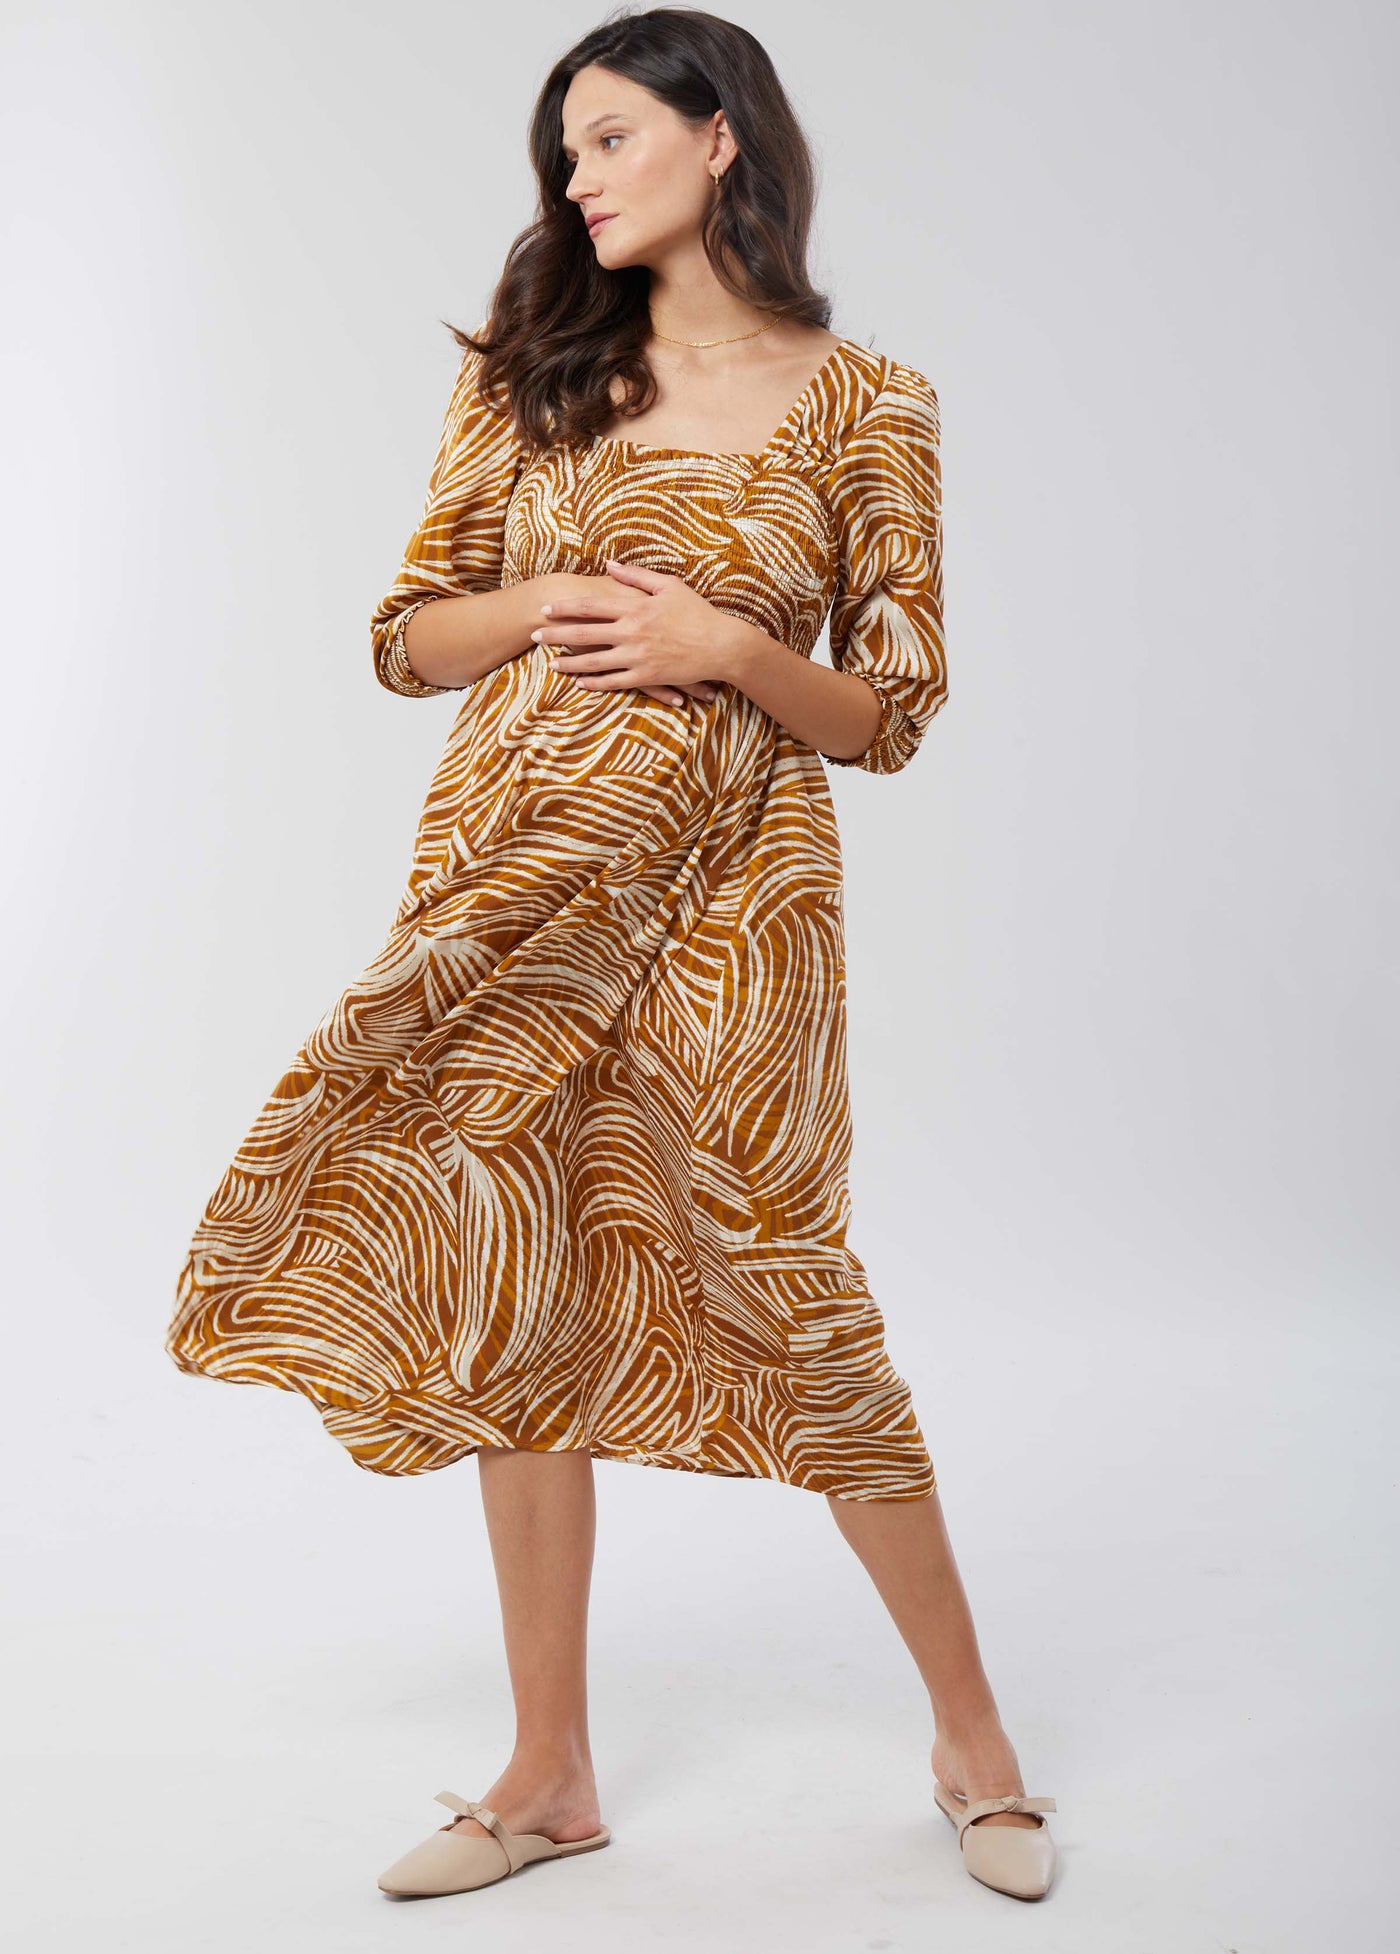 Rachel is 5’10", 28 weeks pregnant, and wearing size medium||Whimsical Wave